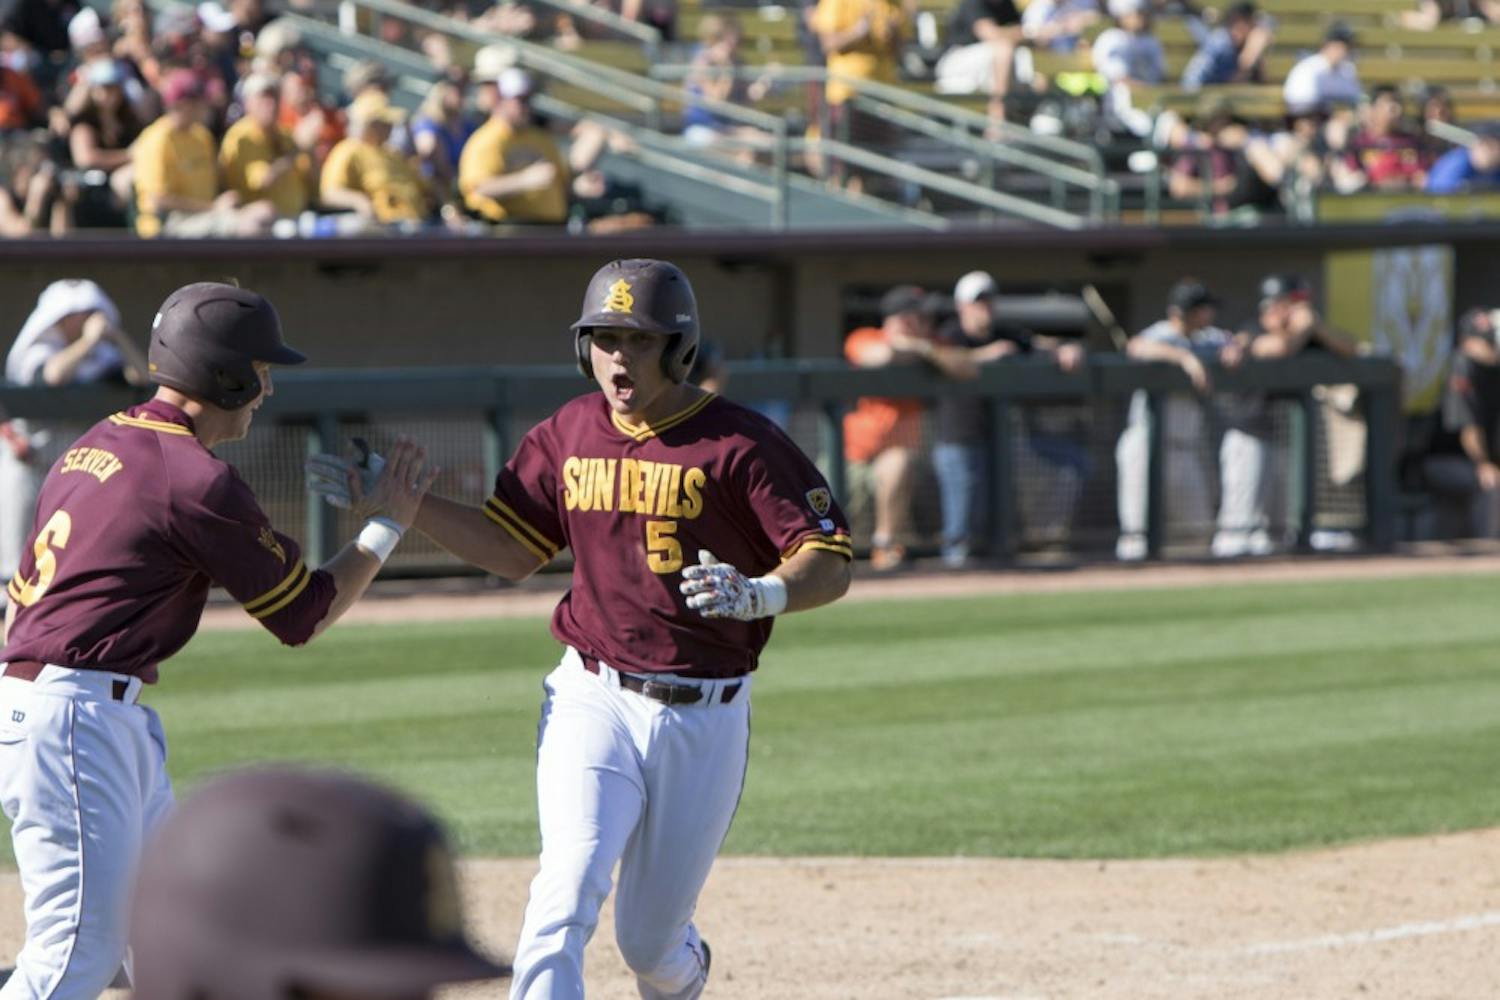 Senior Joey Bielek (right) celebrates with Sophomore Brian Serven (left) after a two-run single by Freshman Andrew Snow at Phoenix Municipal Stadium on Sunday March 15, 2015. The Sun Devils defeated the Beavers 7-3. (Jacob Stanek/ The State Press)